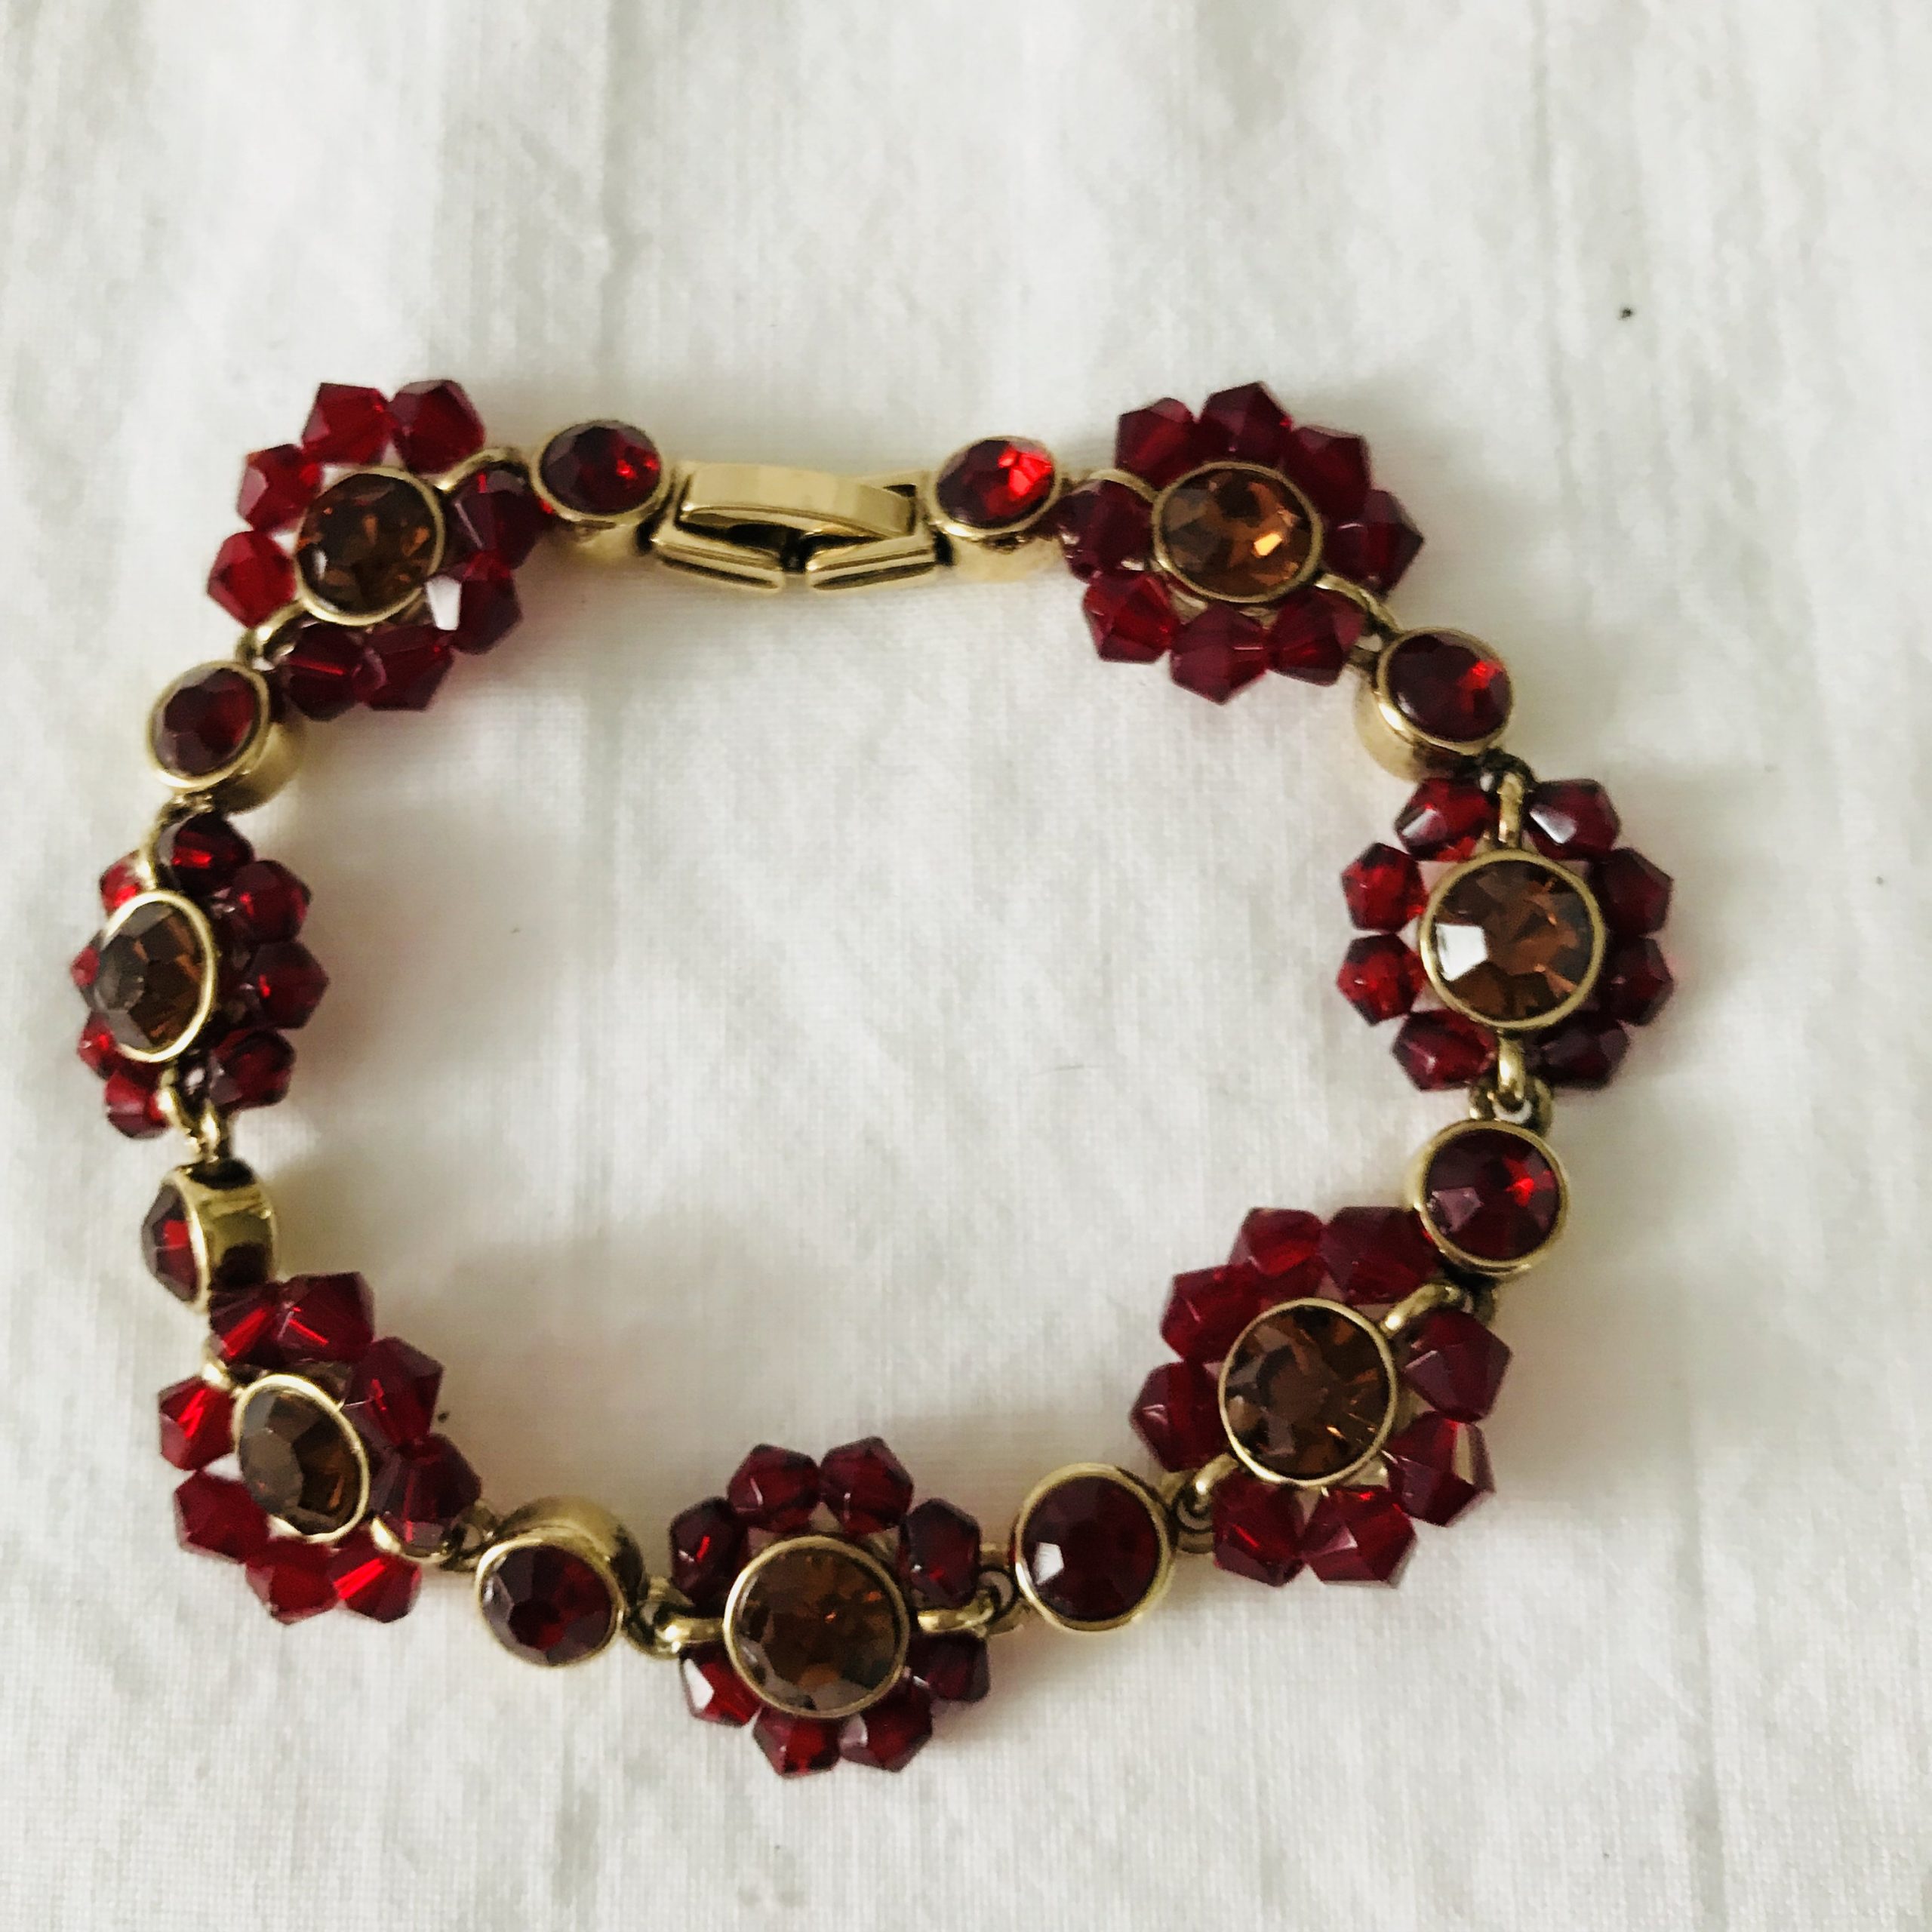 Vintage crystal bracelet red flowers with topaz colored centers gold ...